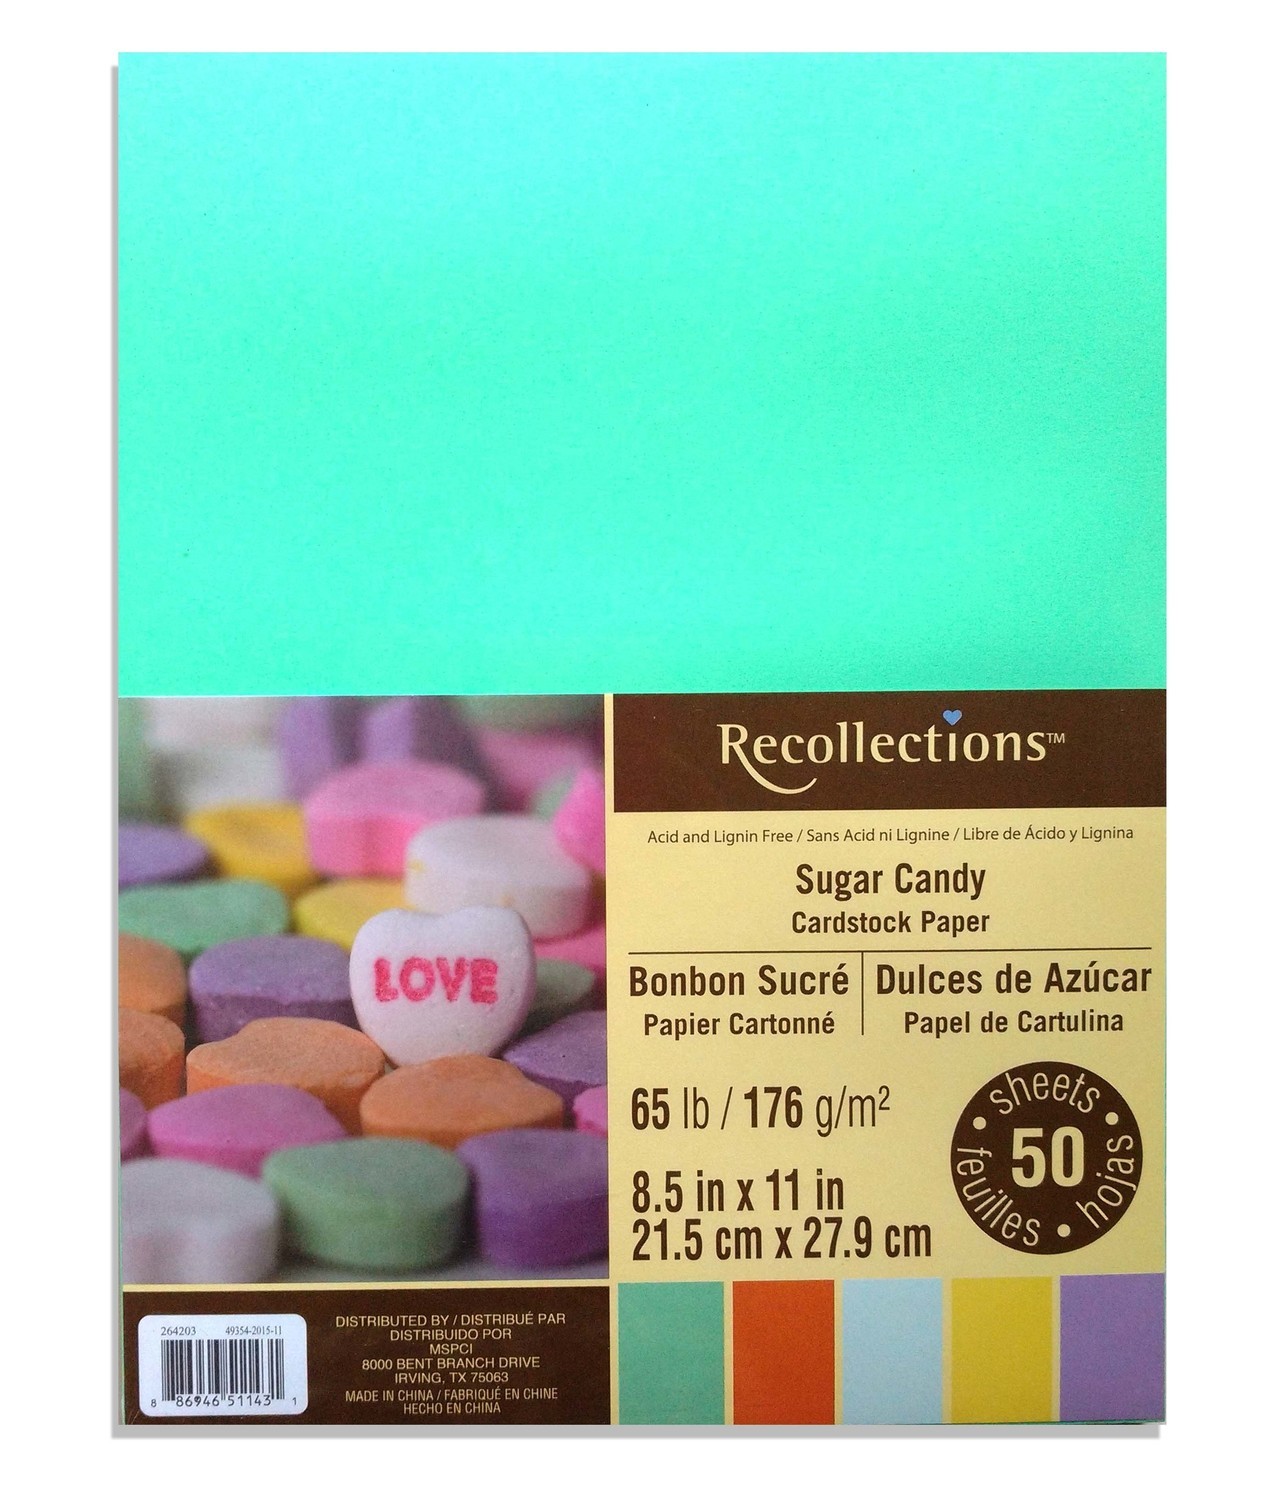 Recollections SUGAR CANDY Cardstock Paper 179gsm- 50/pk